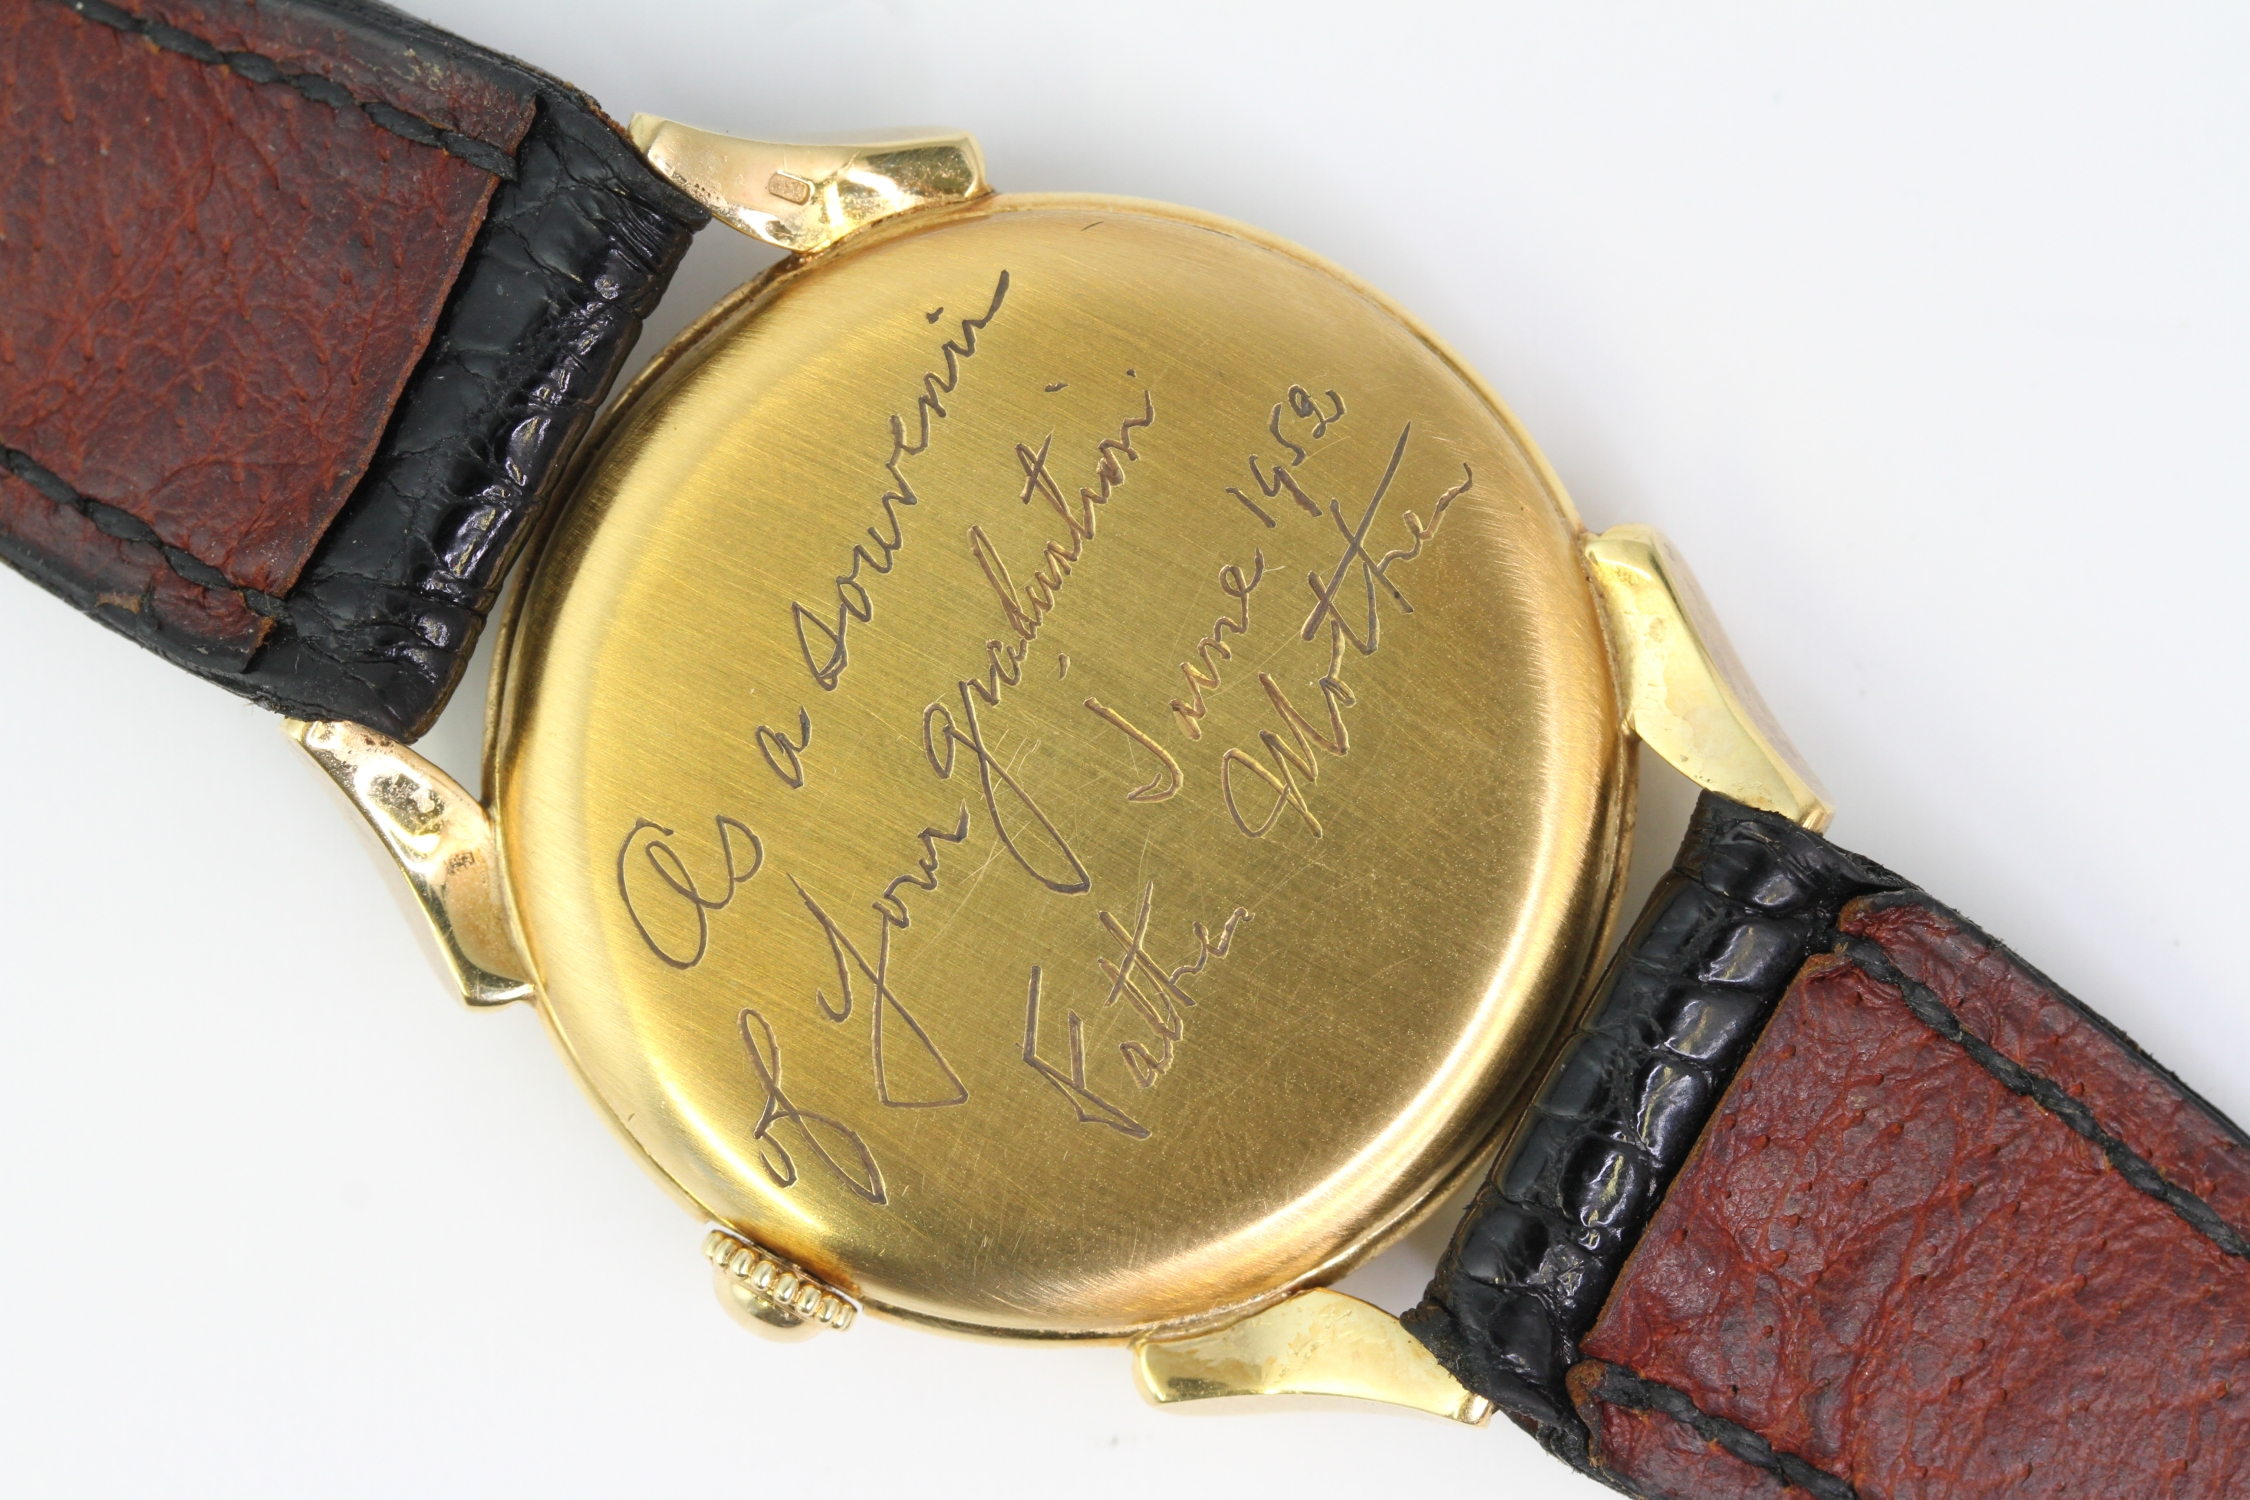 RARE VINTAGE VACHERON & CONSTANTIN DRESS WATCH CIRCA 1950s, silvered dial with gold dagger hour - Image 2 of 4